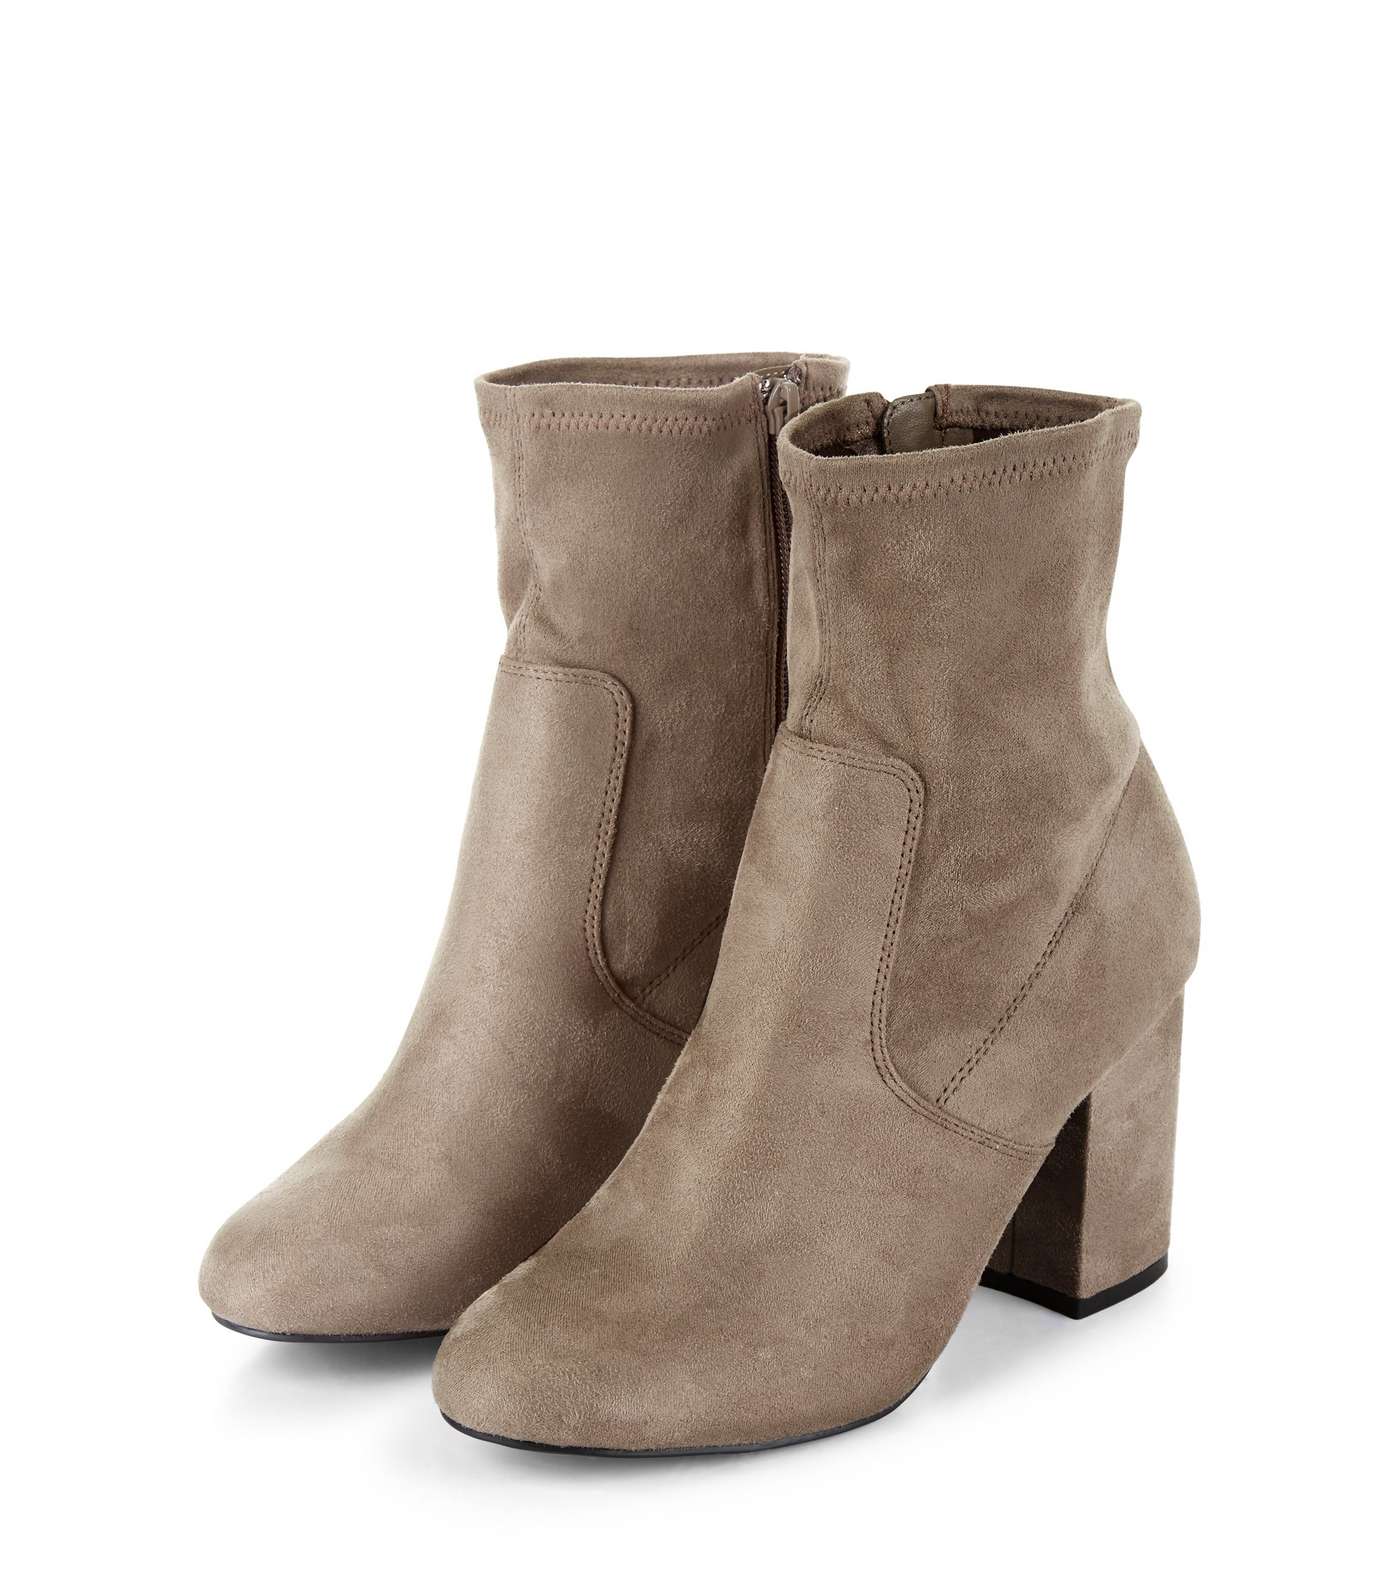 Grey Suedette Block Heel High Ankle Boots  Image 3